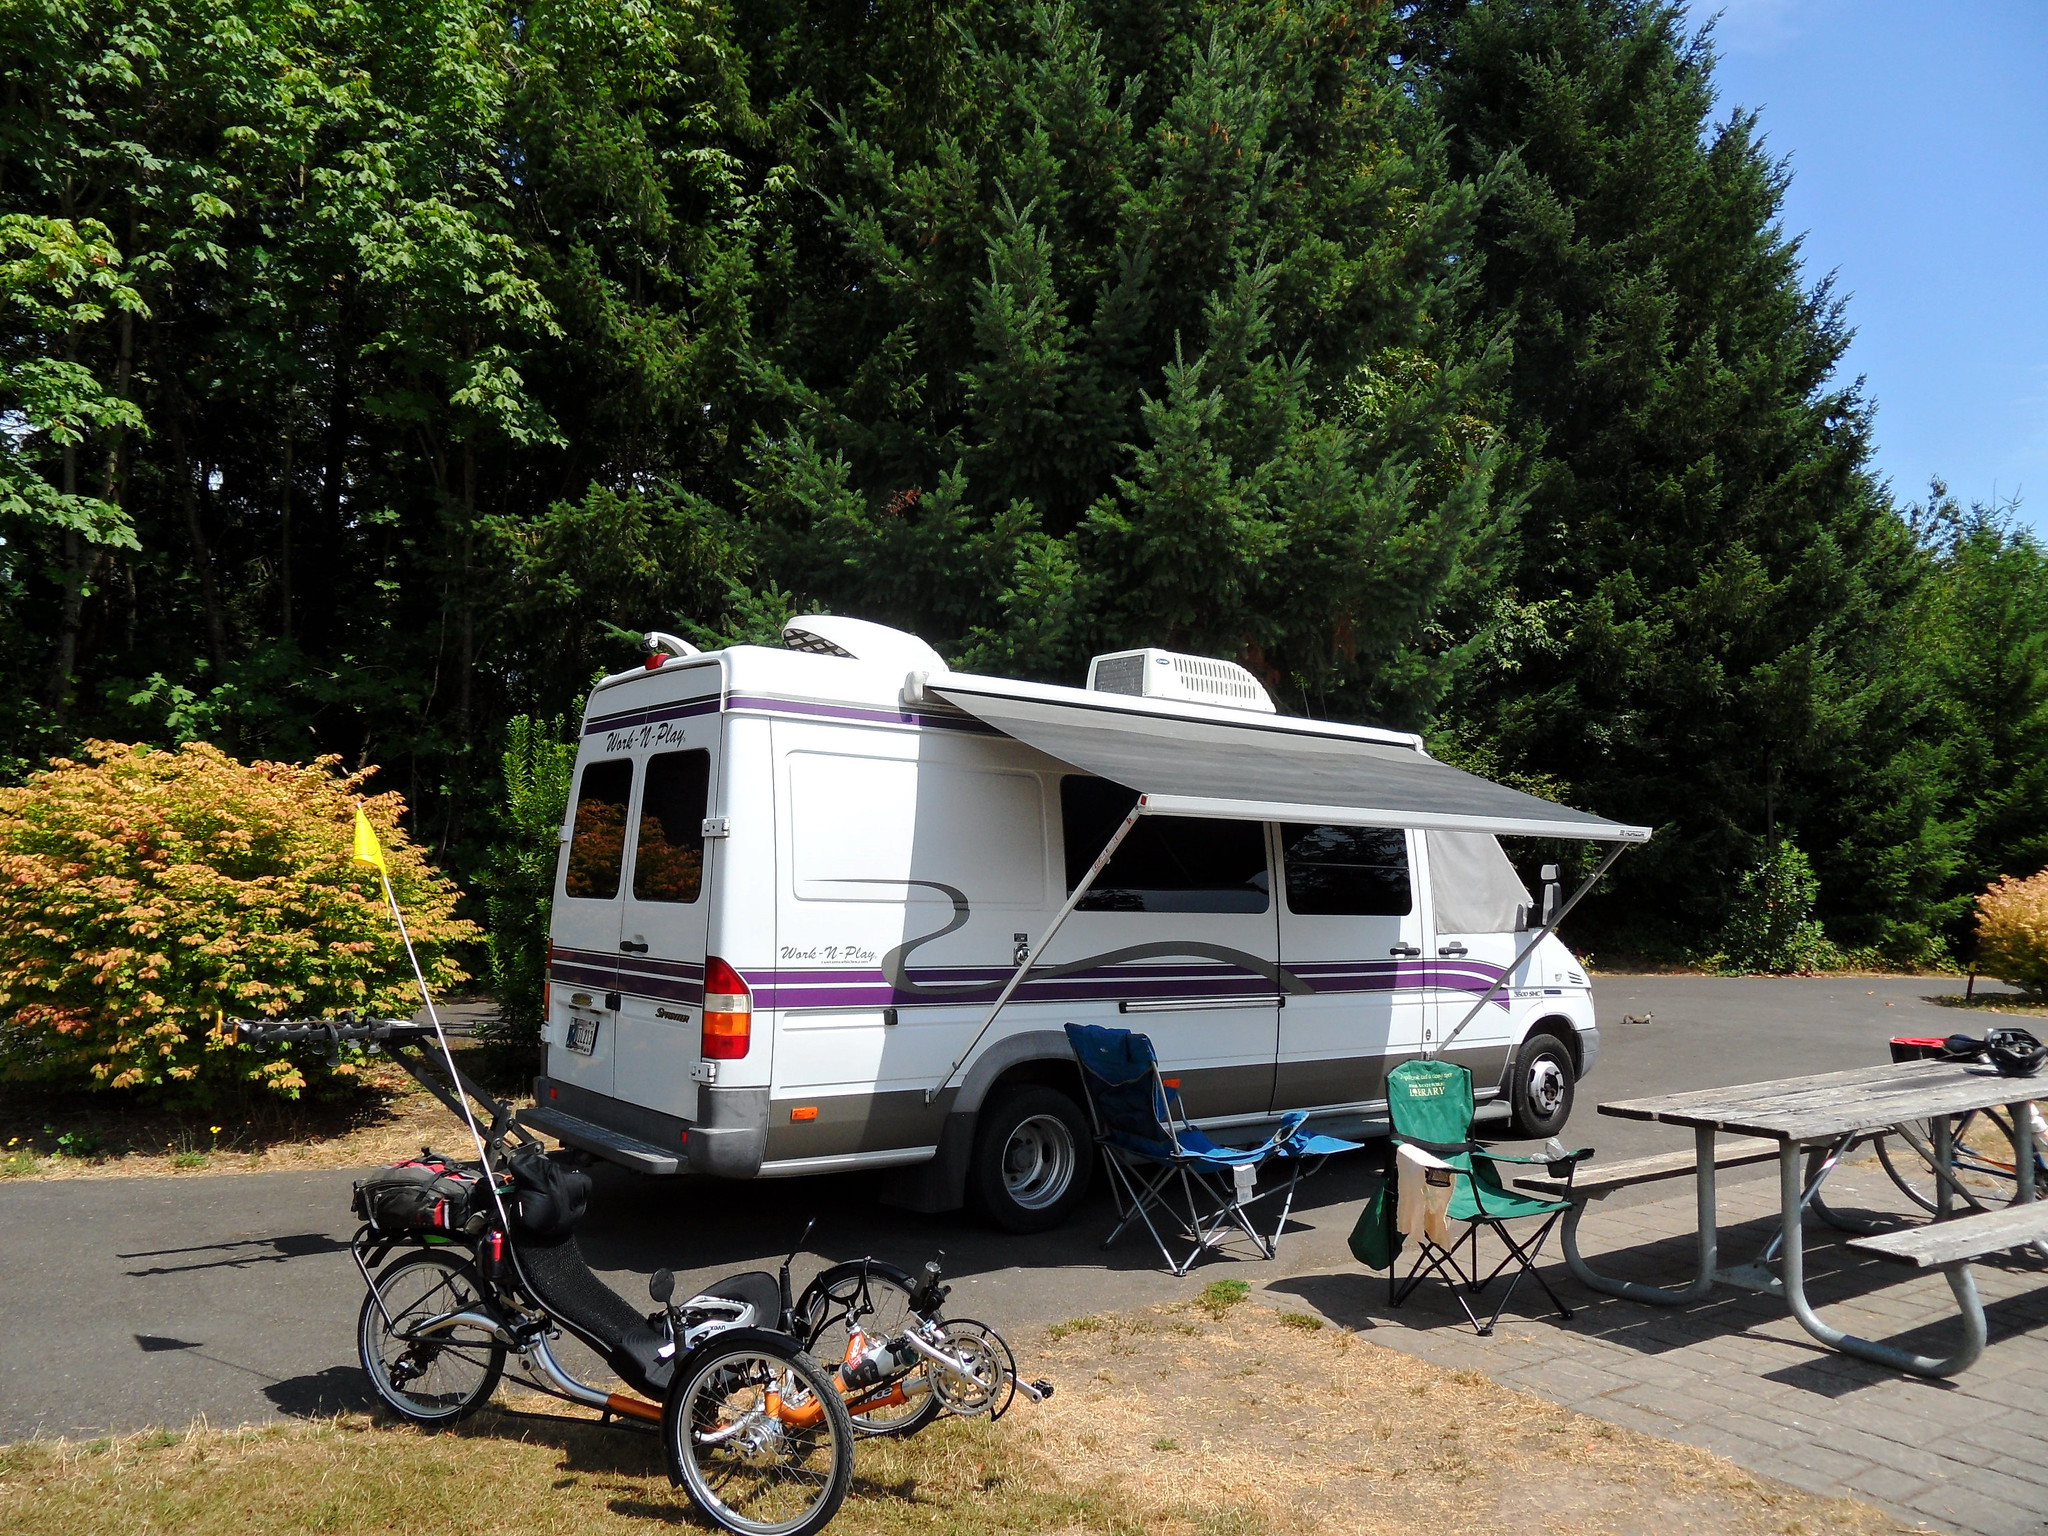 White and marron Sprinter van conversion parked in a campsite at Champoeg State Park in Oregon on a clear and sunny day